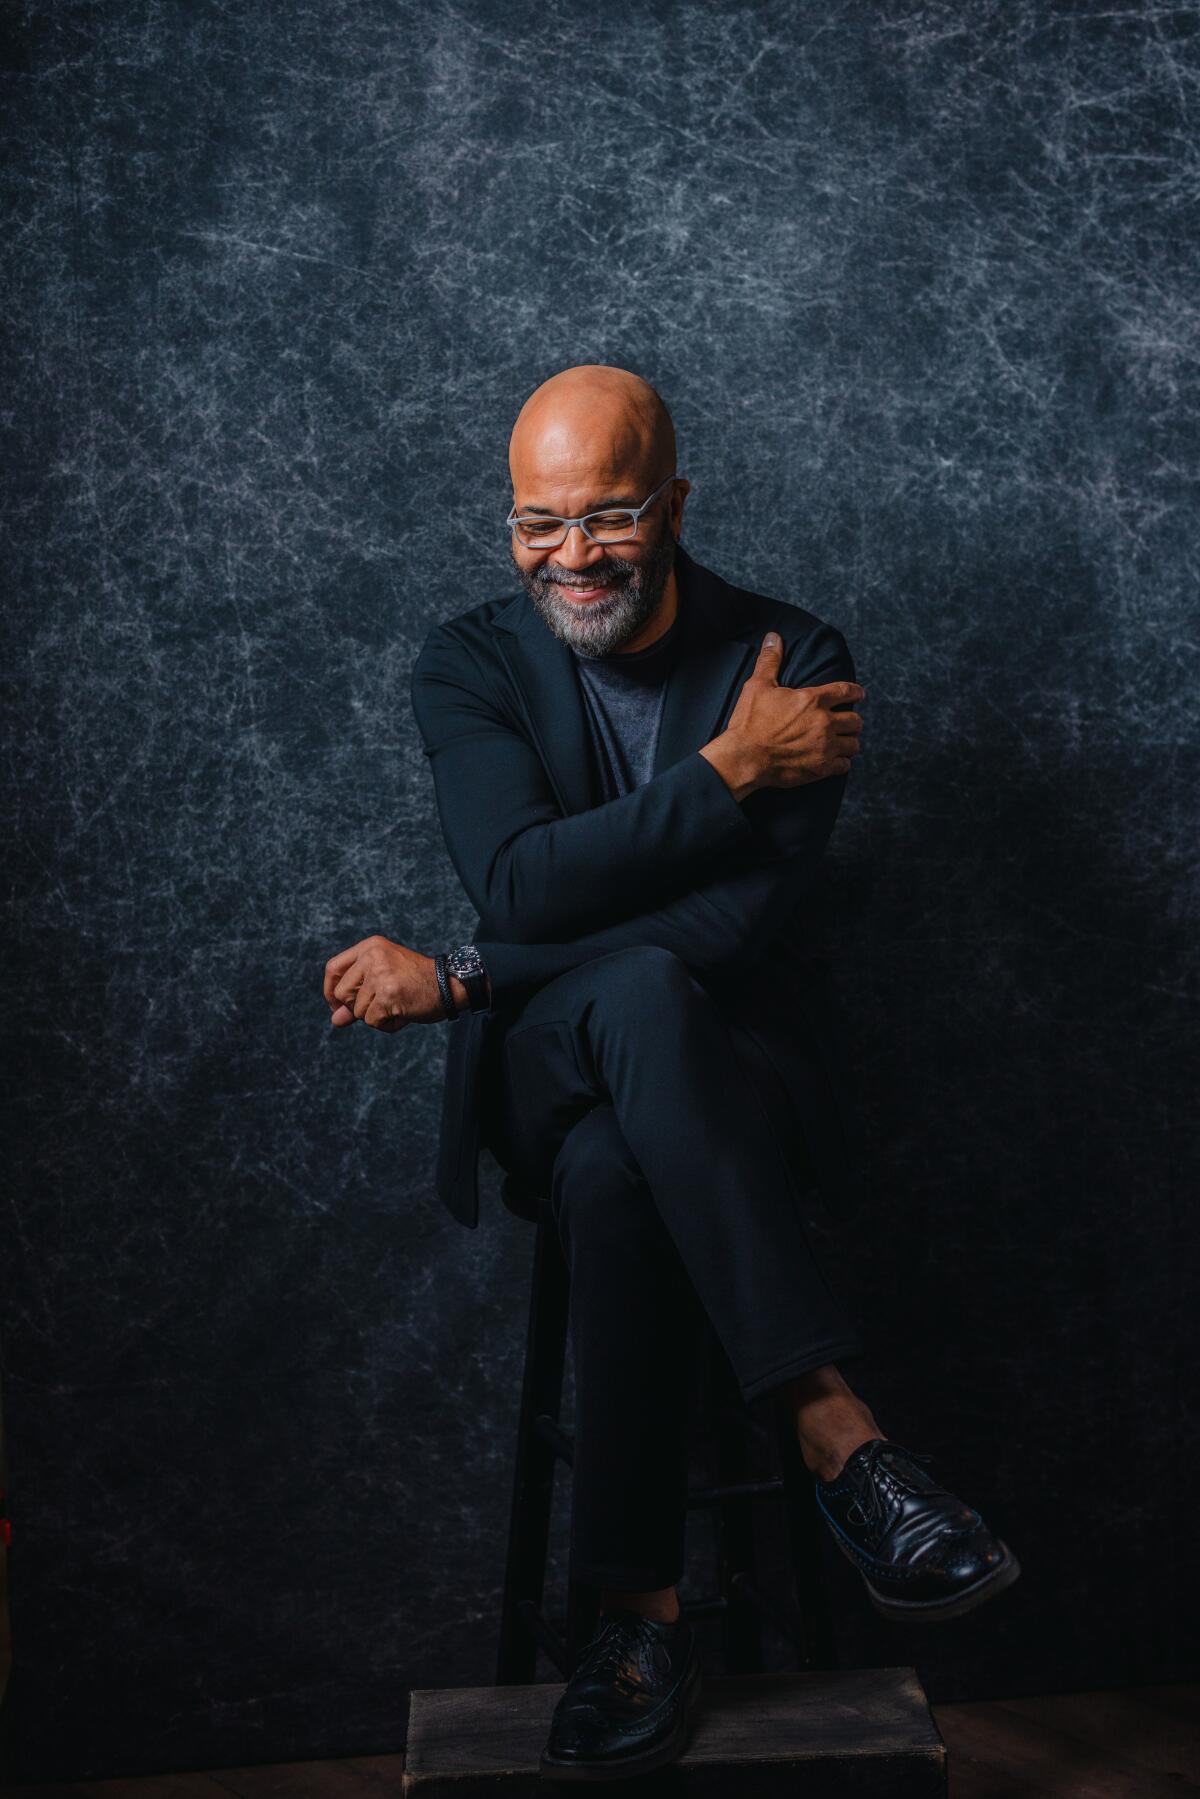 Jeffrey Wright crosses his arms, sitting on a stool and looking down in a portrait.